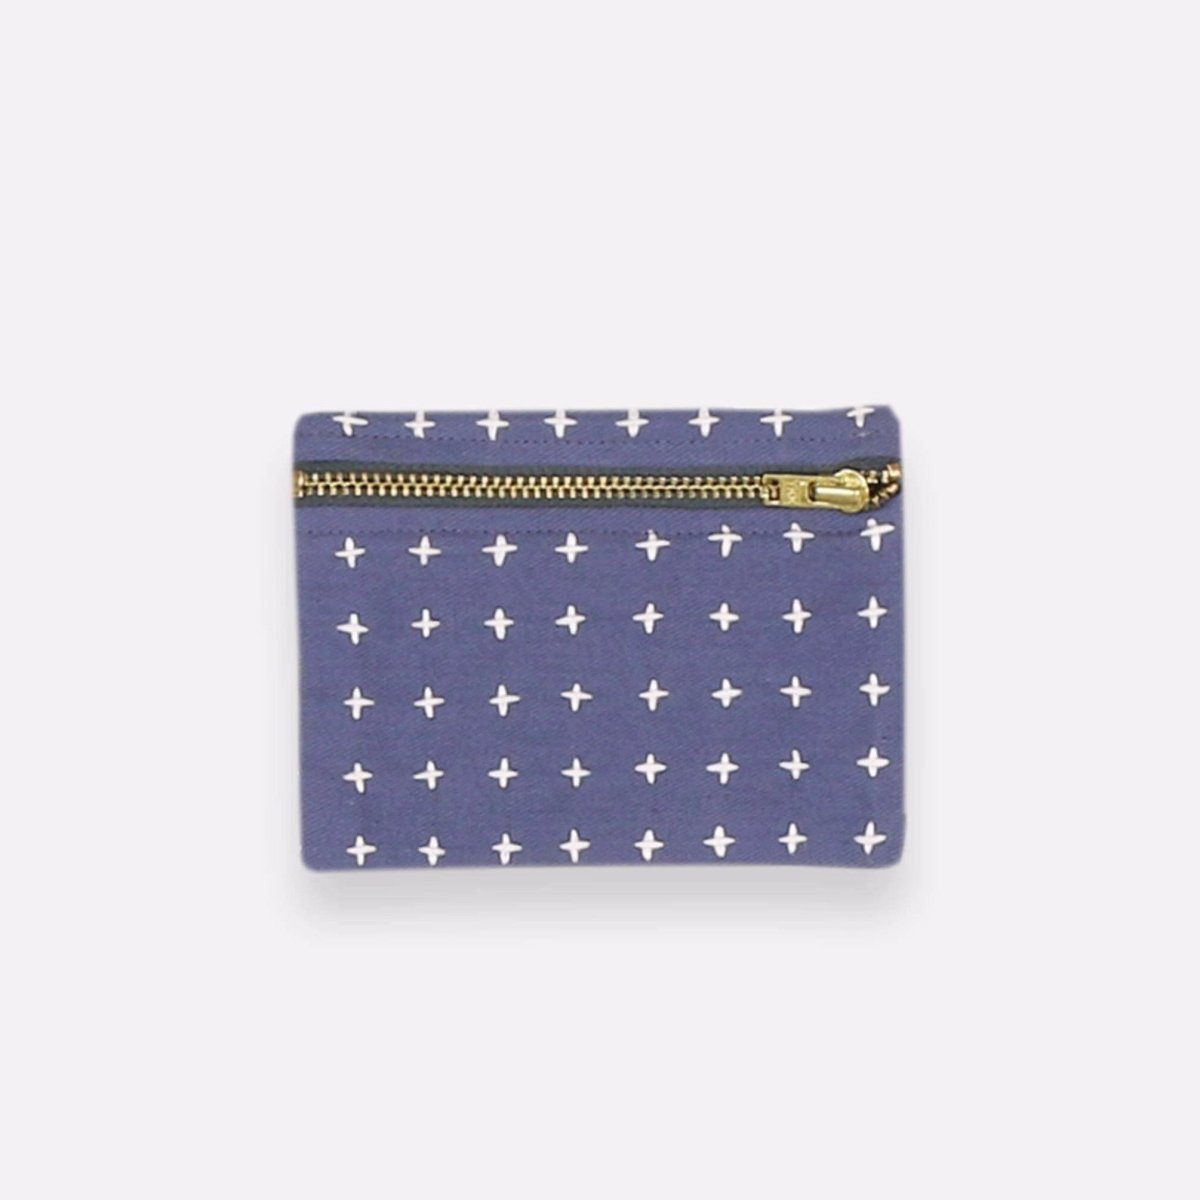 Square cross-stitch coin purse in the color Slate. Designed by Anchal in Louisville, Kentucky and made in Ajmer, India.